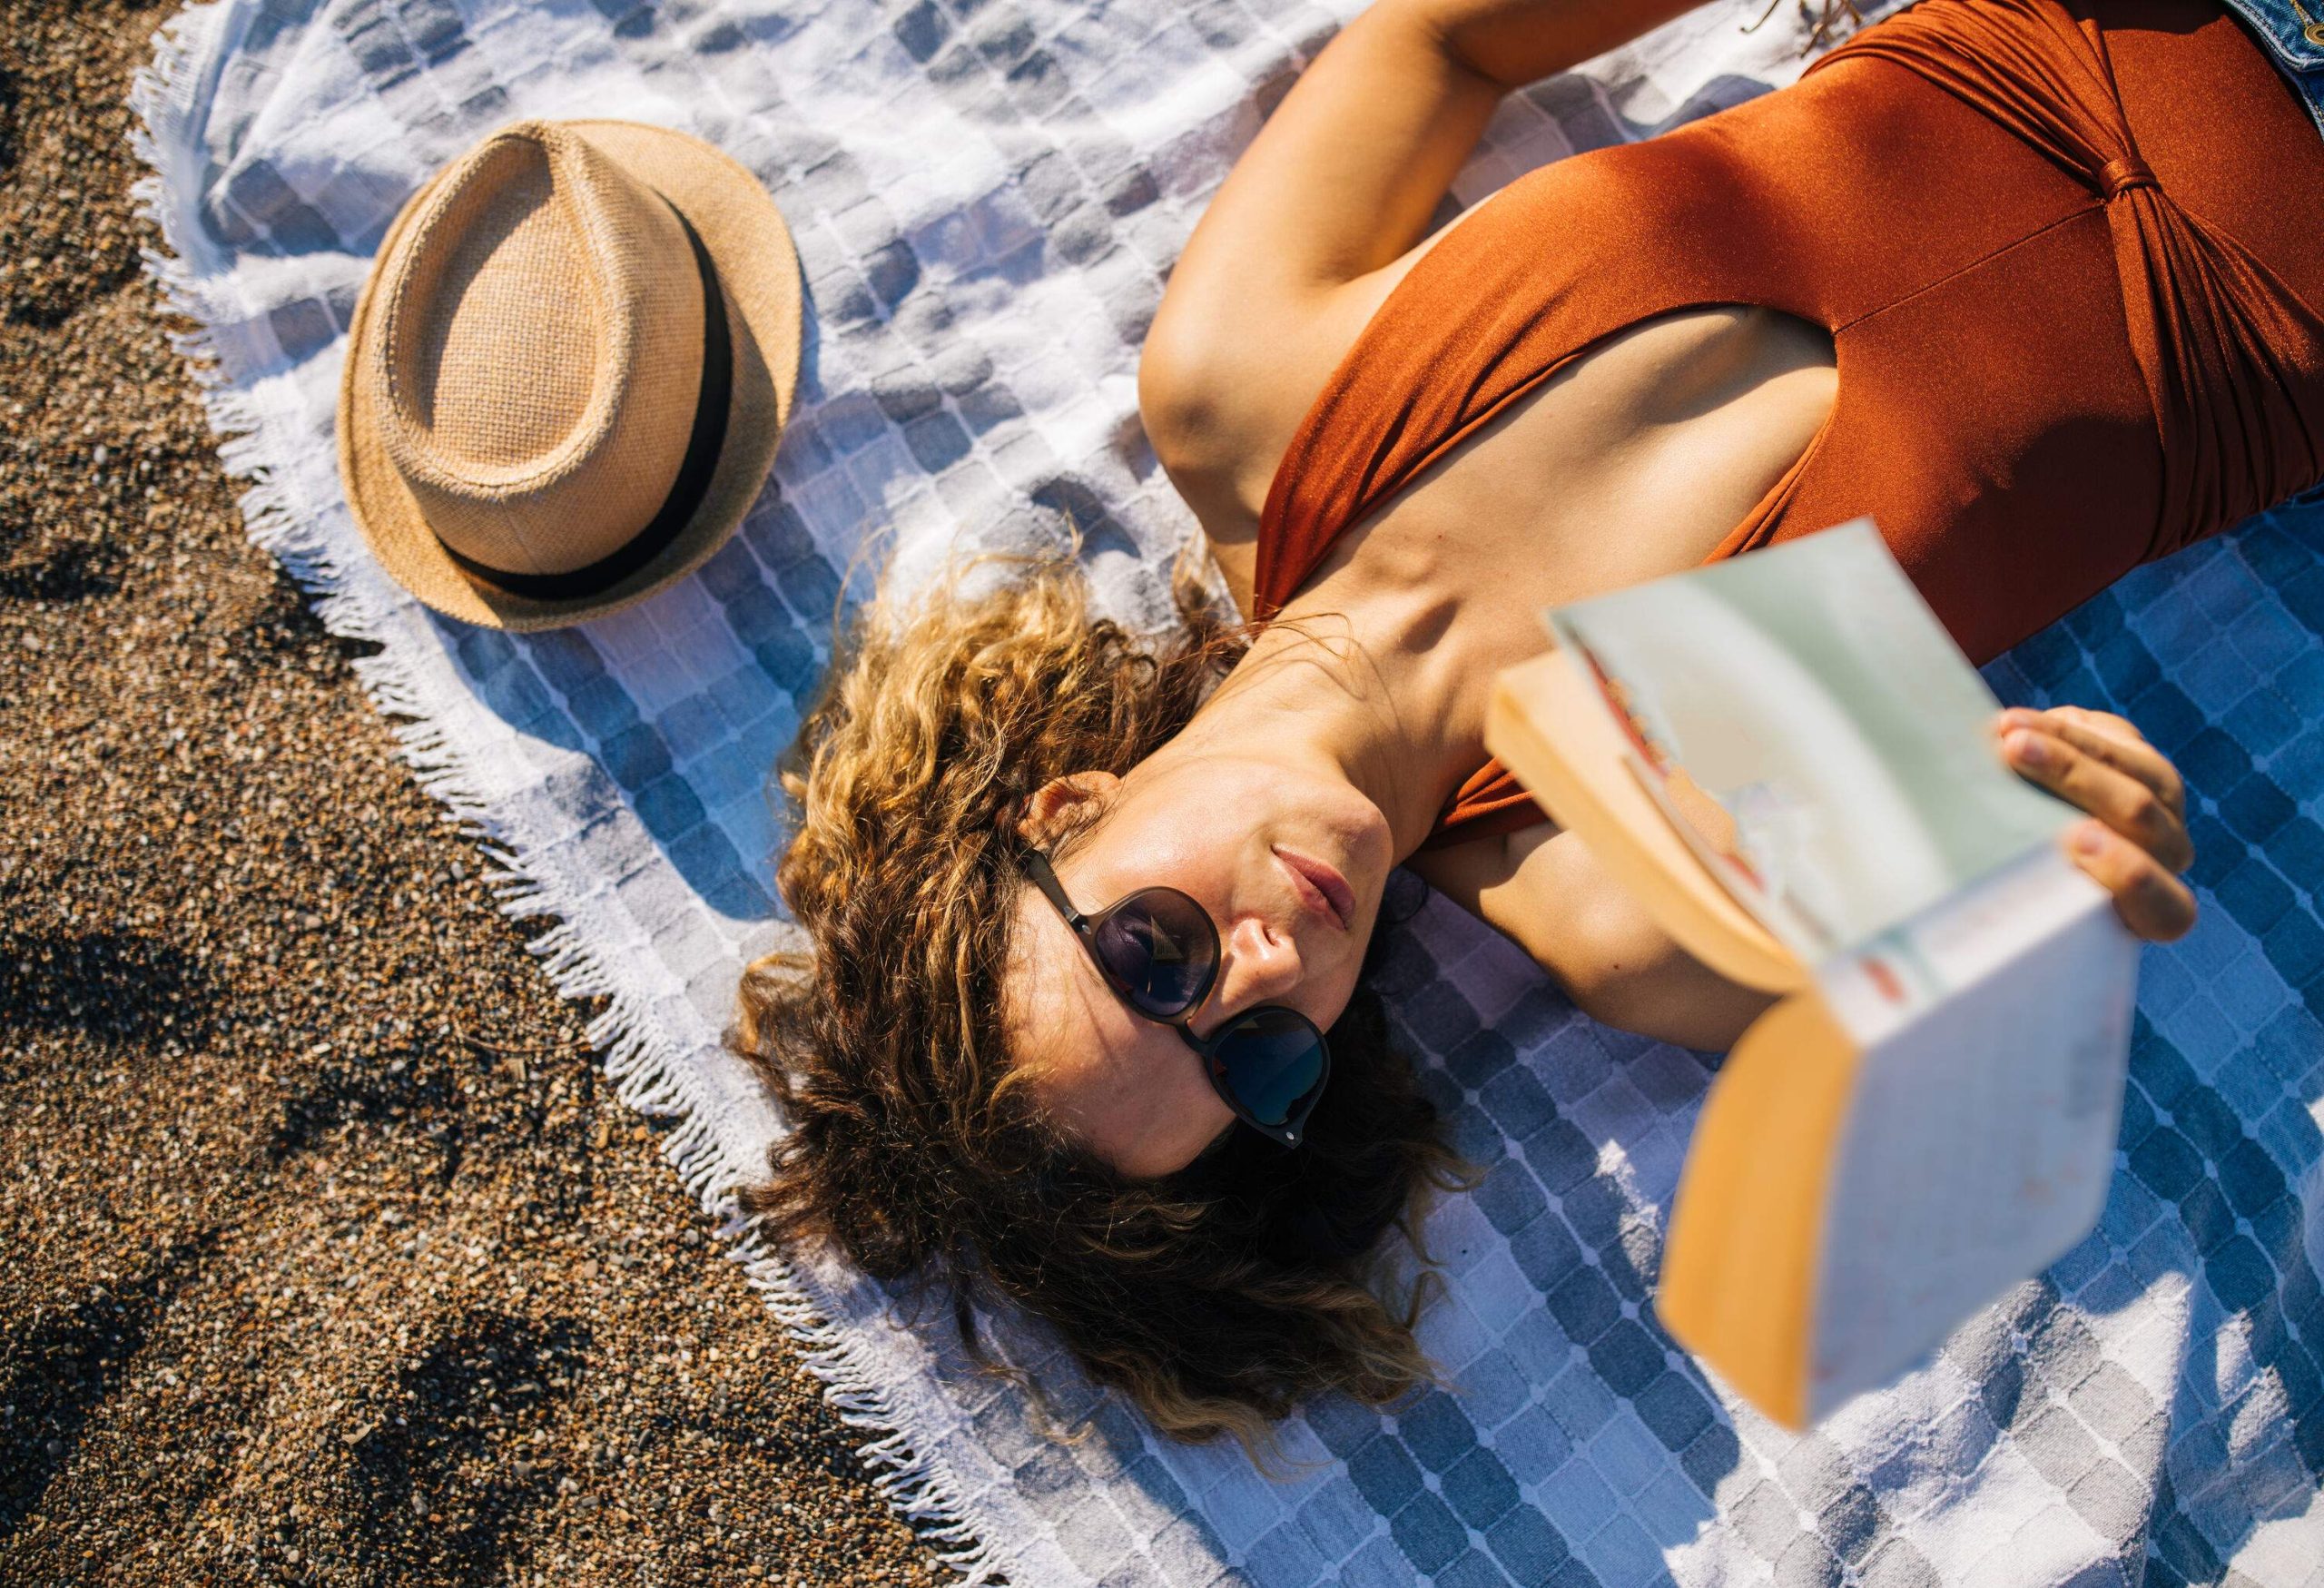 A brunette woman in sunglasses and brown swimwear lies on a picnic blanket beside a straw hat while reading a book.